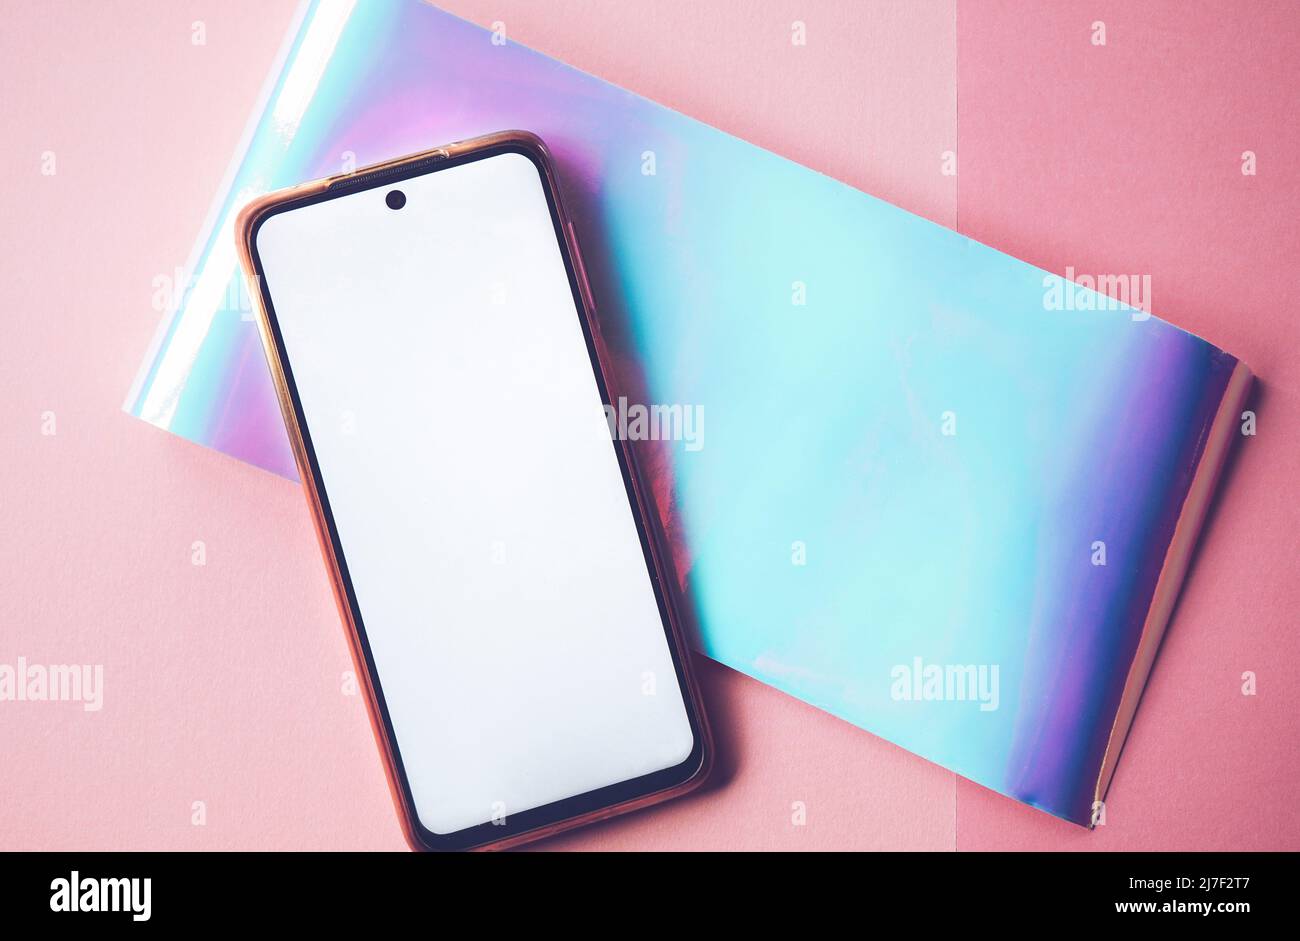 Elegant android phone mockup with a fresh design with iridiscent colors Stock Photo